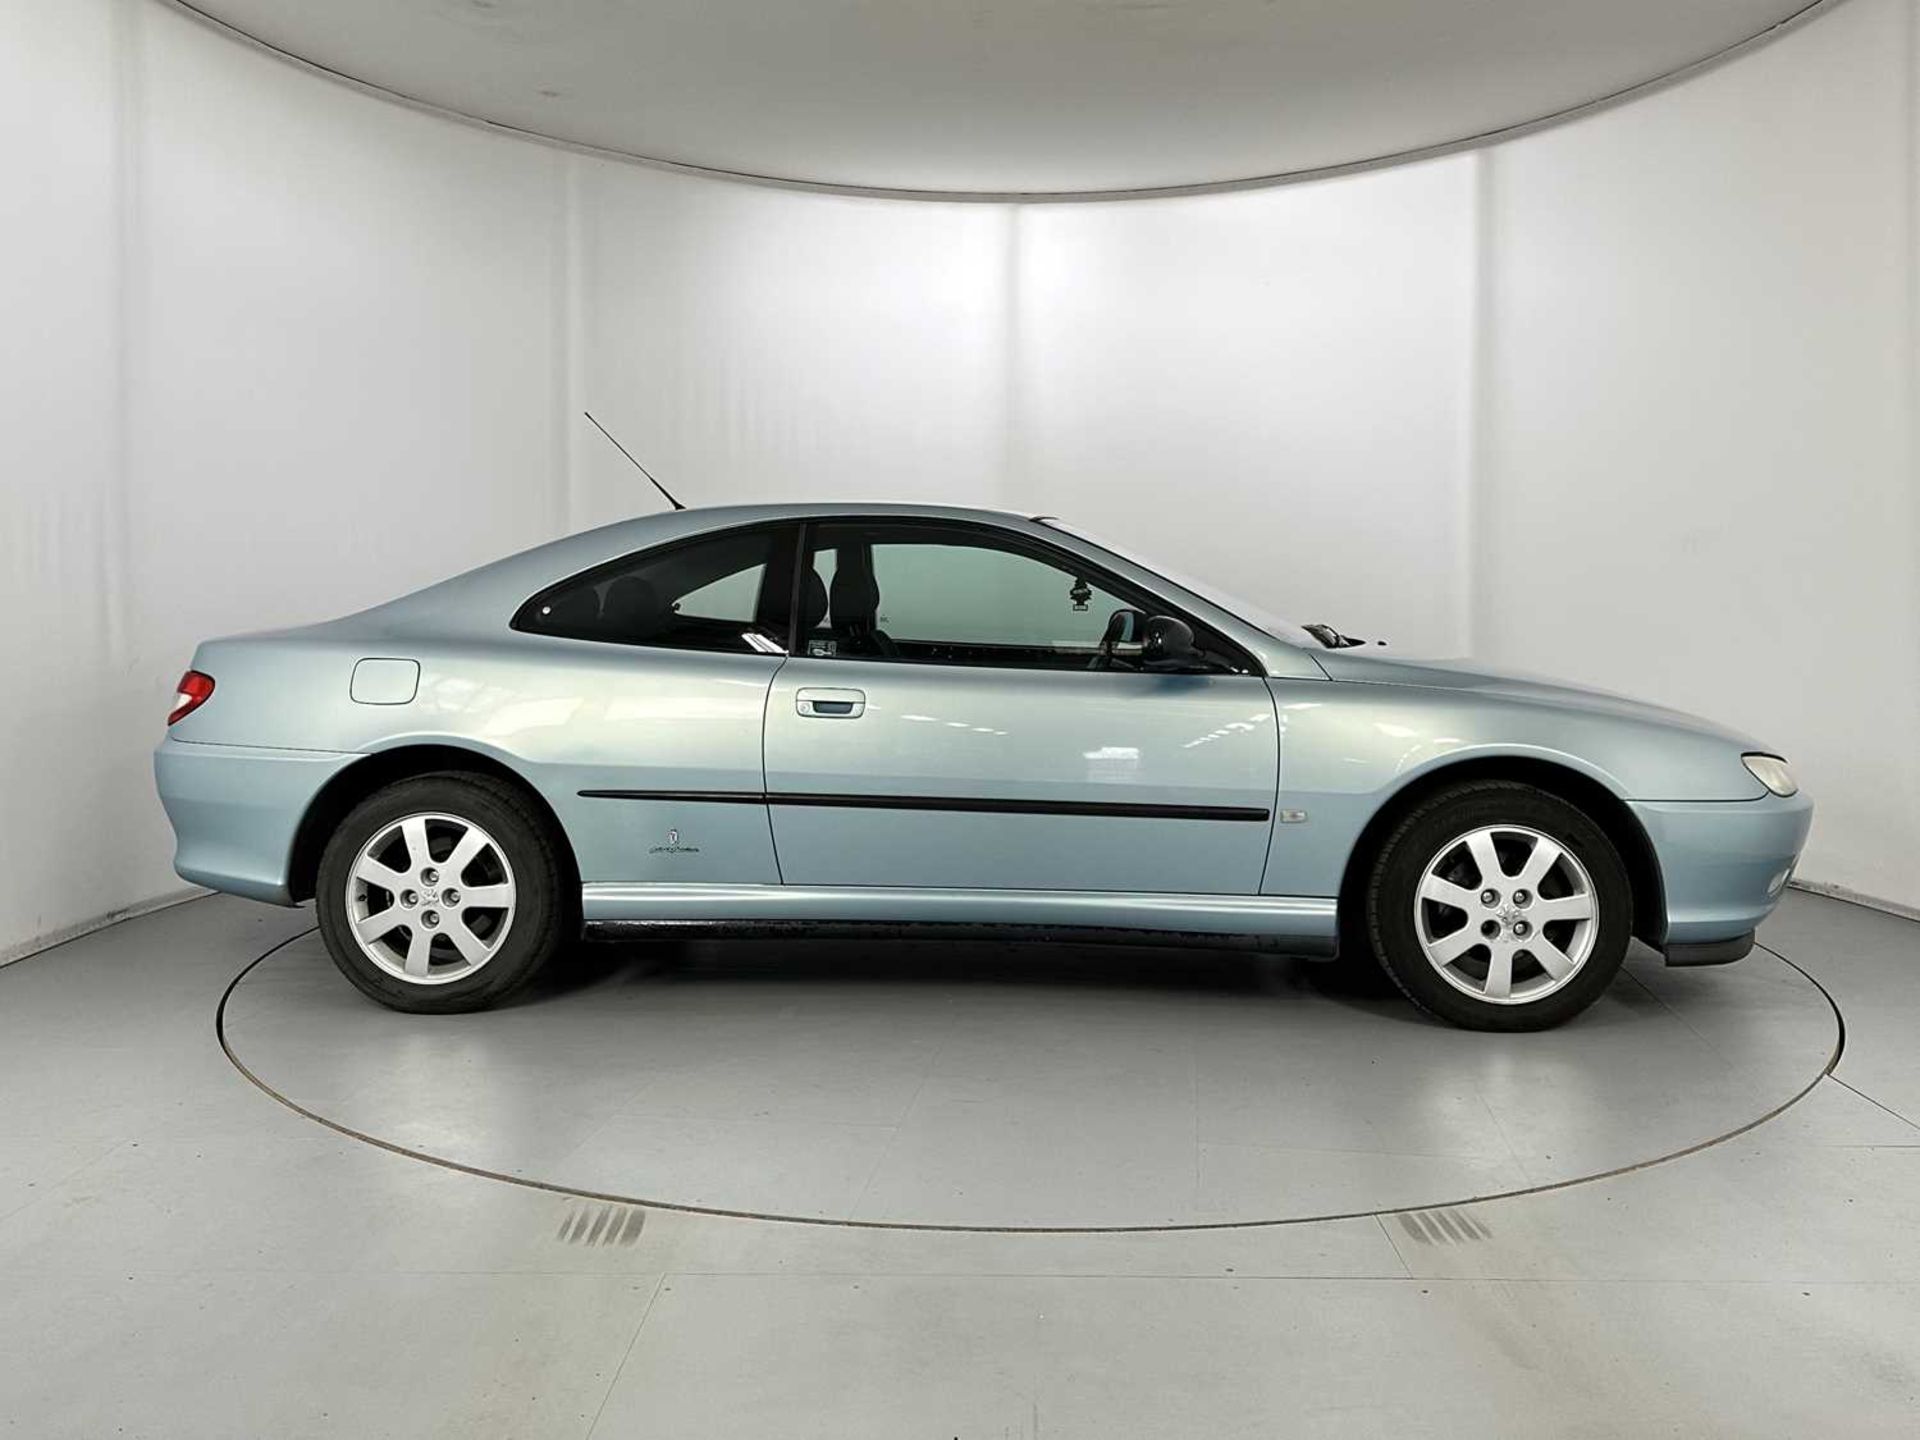 2002 Peugeot 406 Coupe - Image 11 of 28